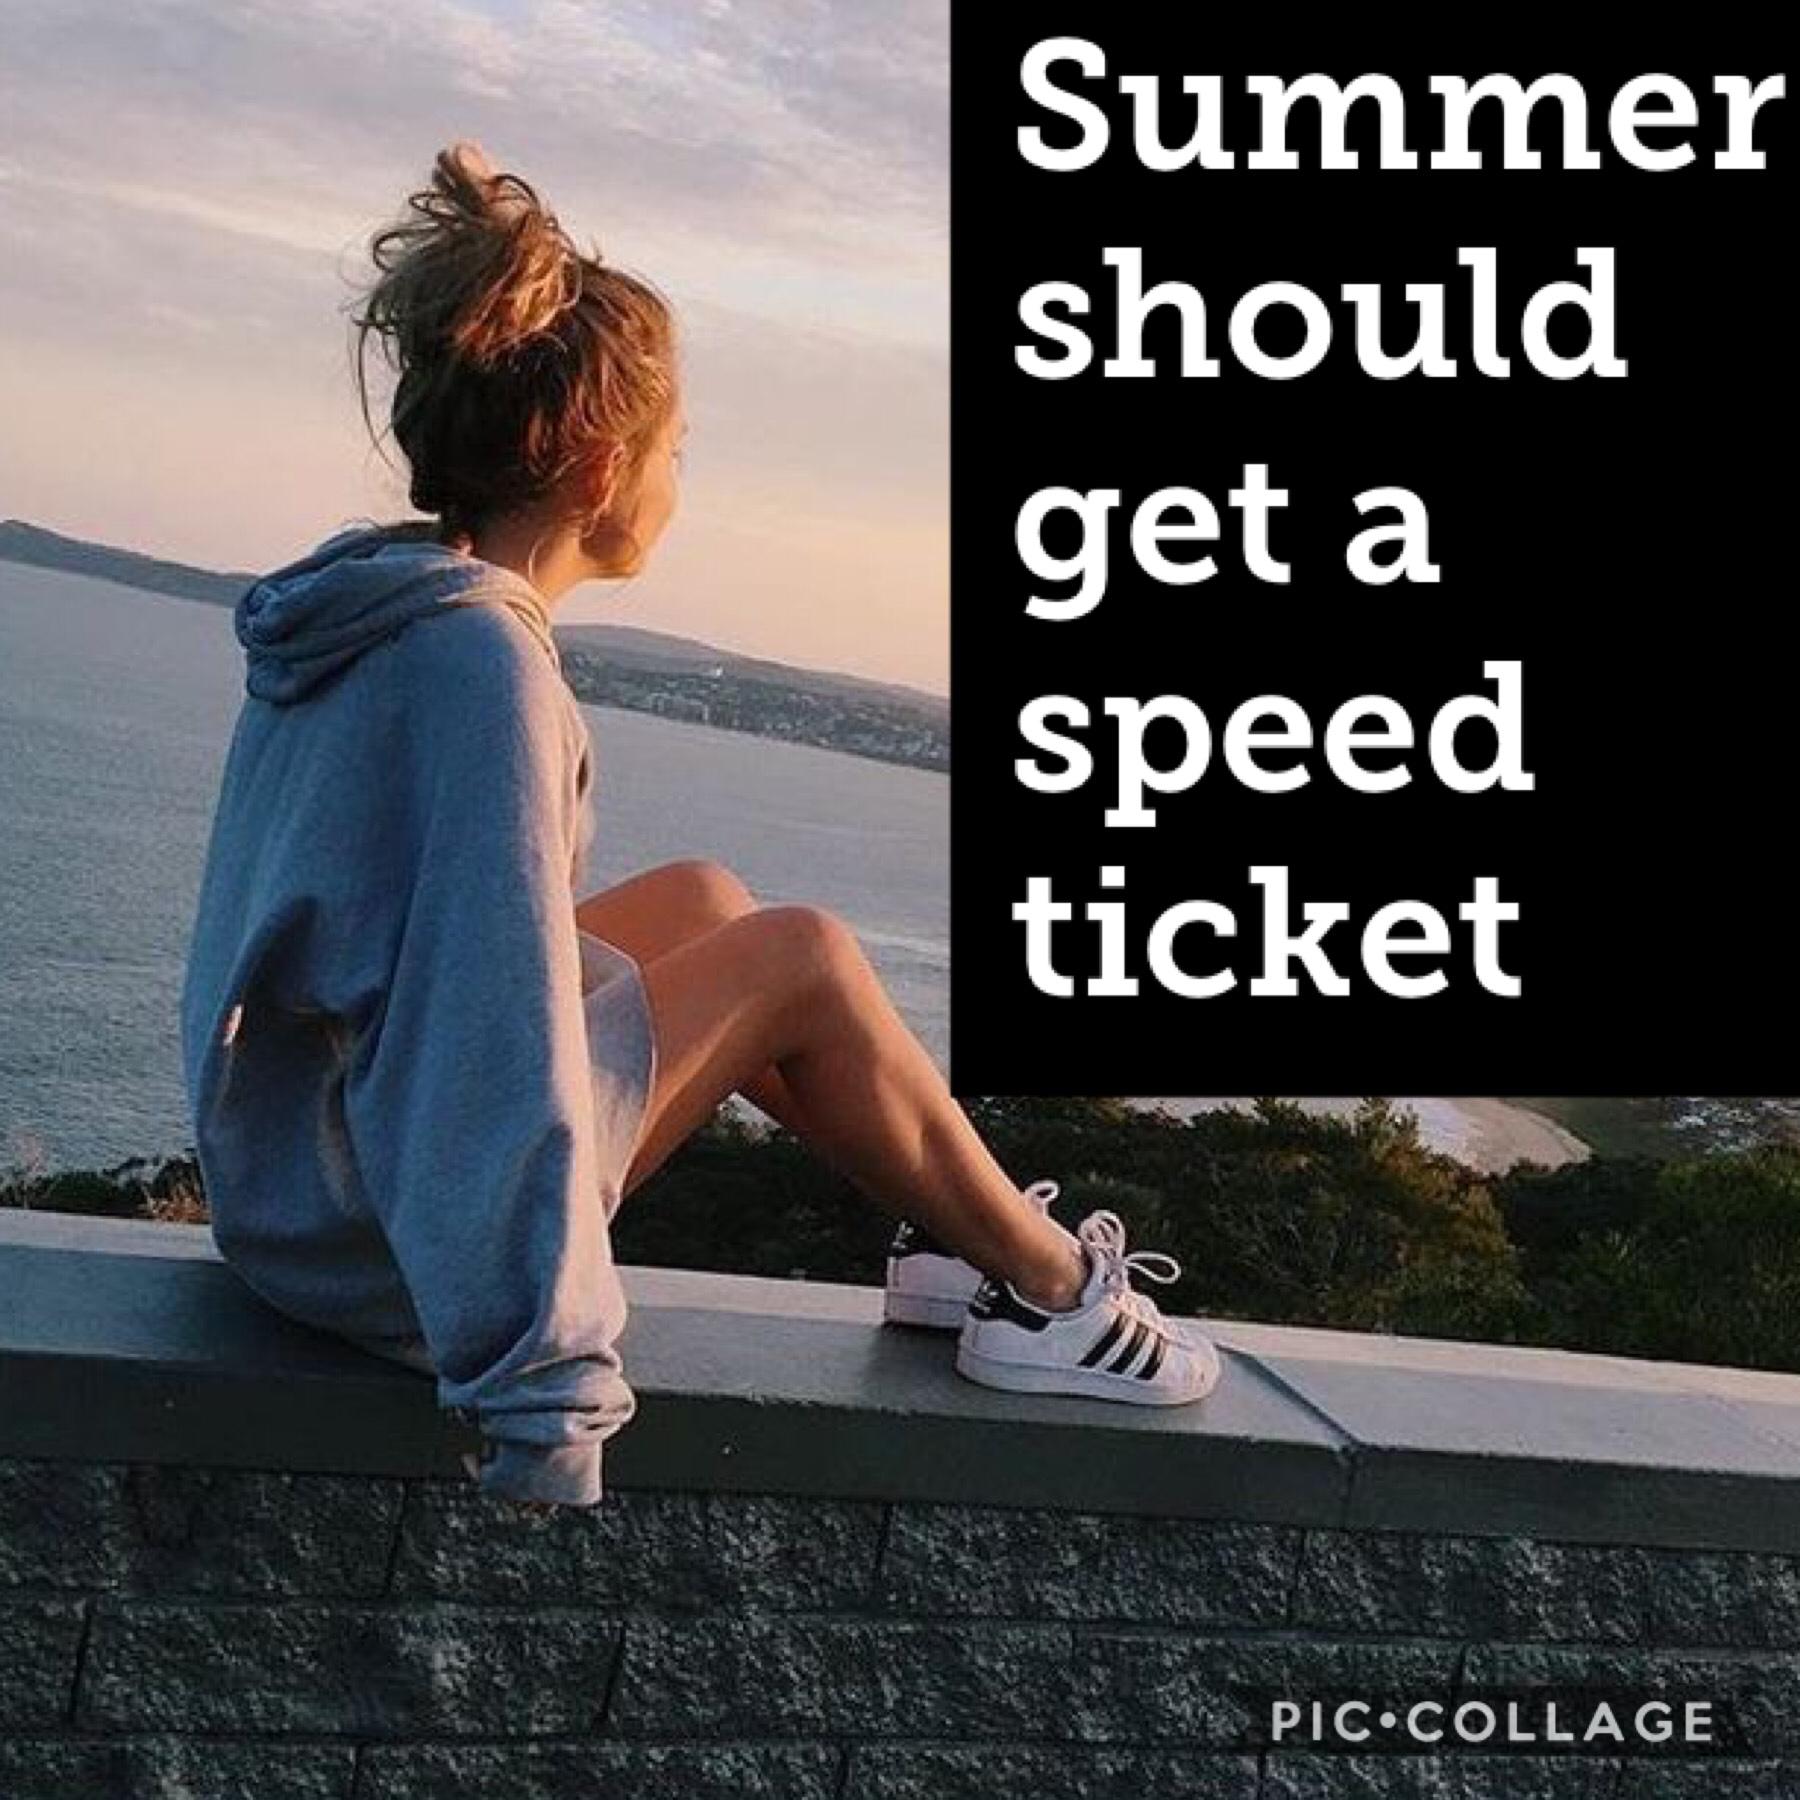 Who else thinks that summer should get a speed ticket?!!?